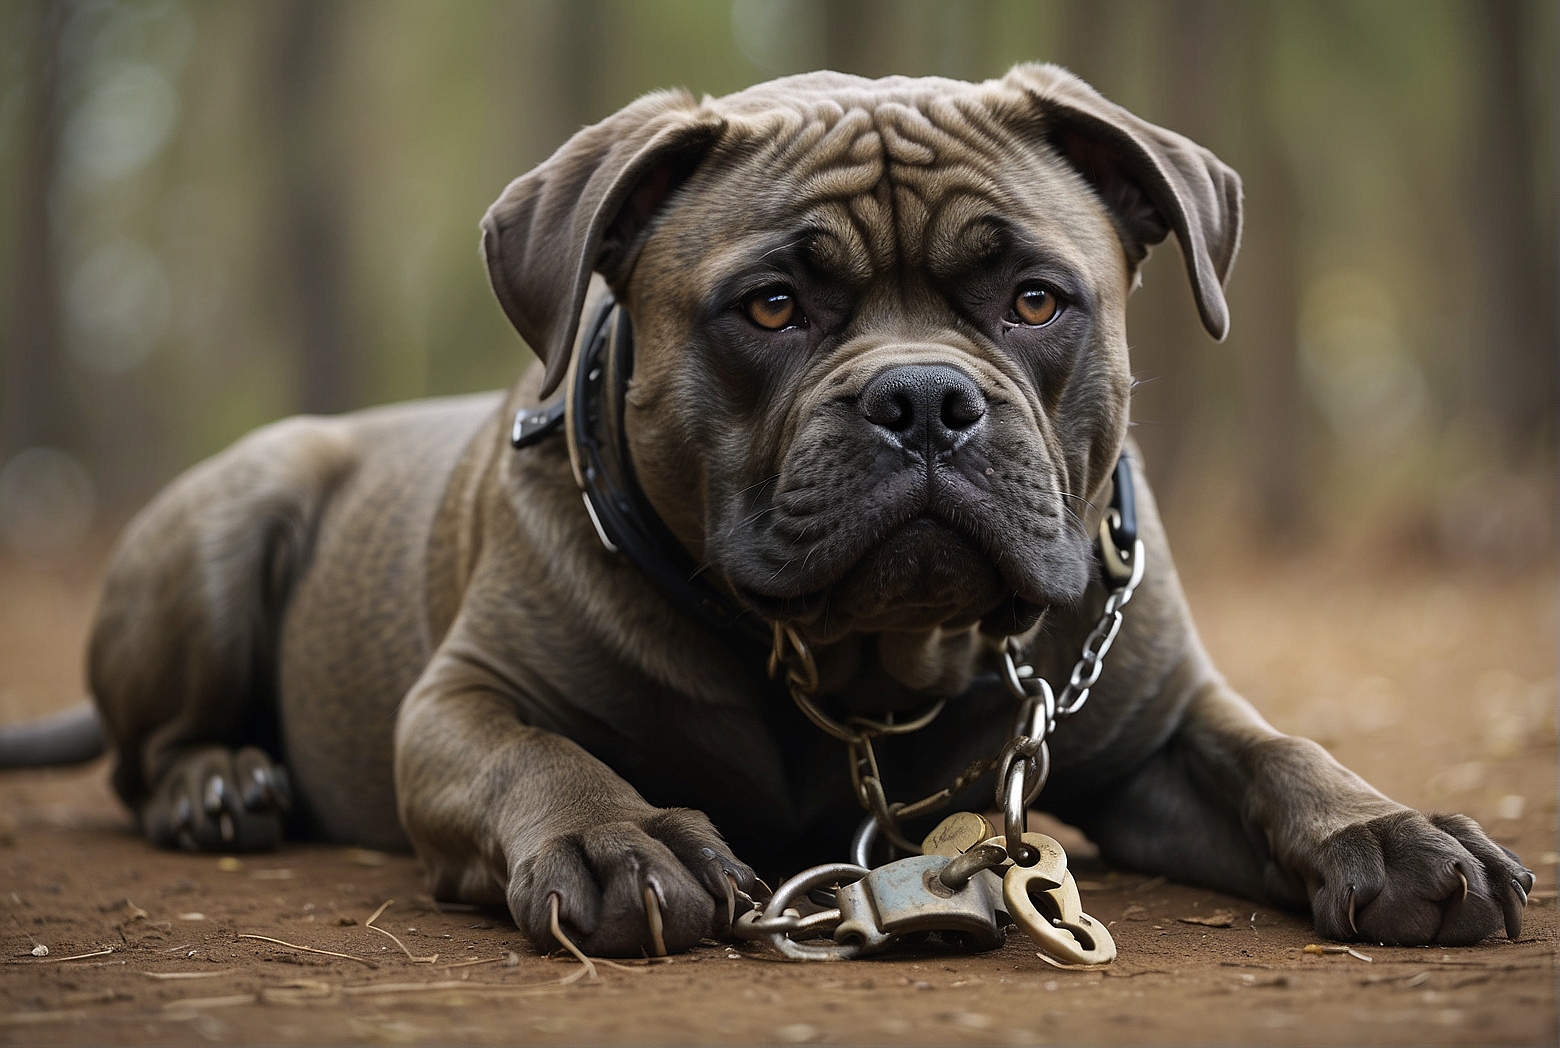 Do Cane Corso Dogs Have Lock Jaw